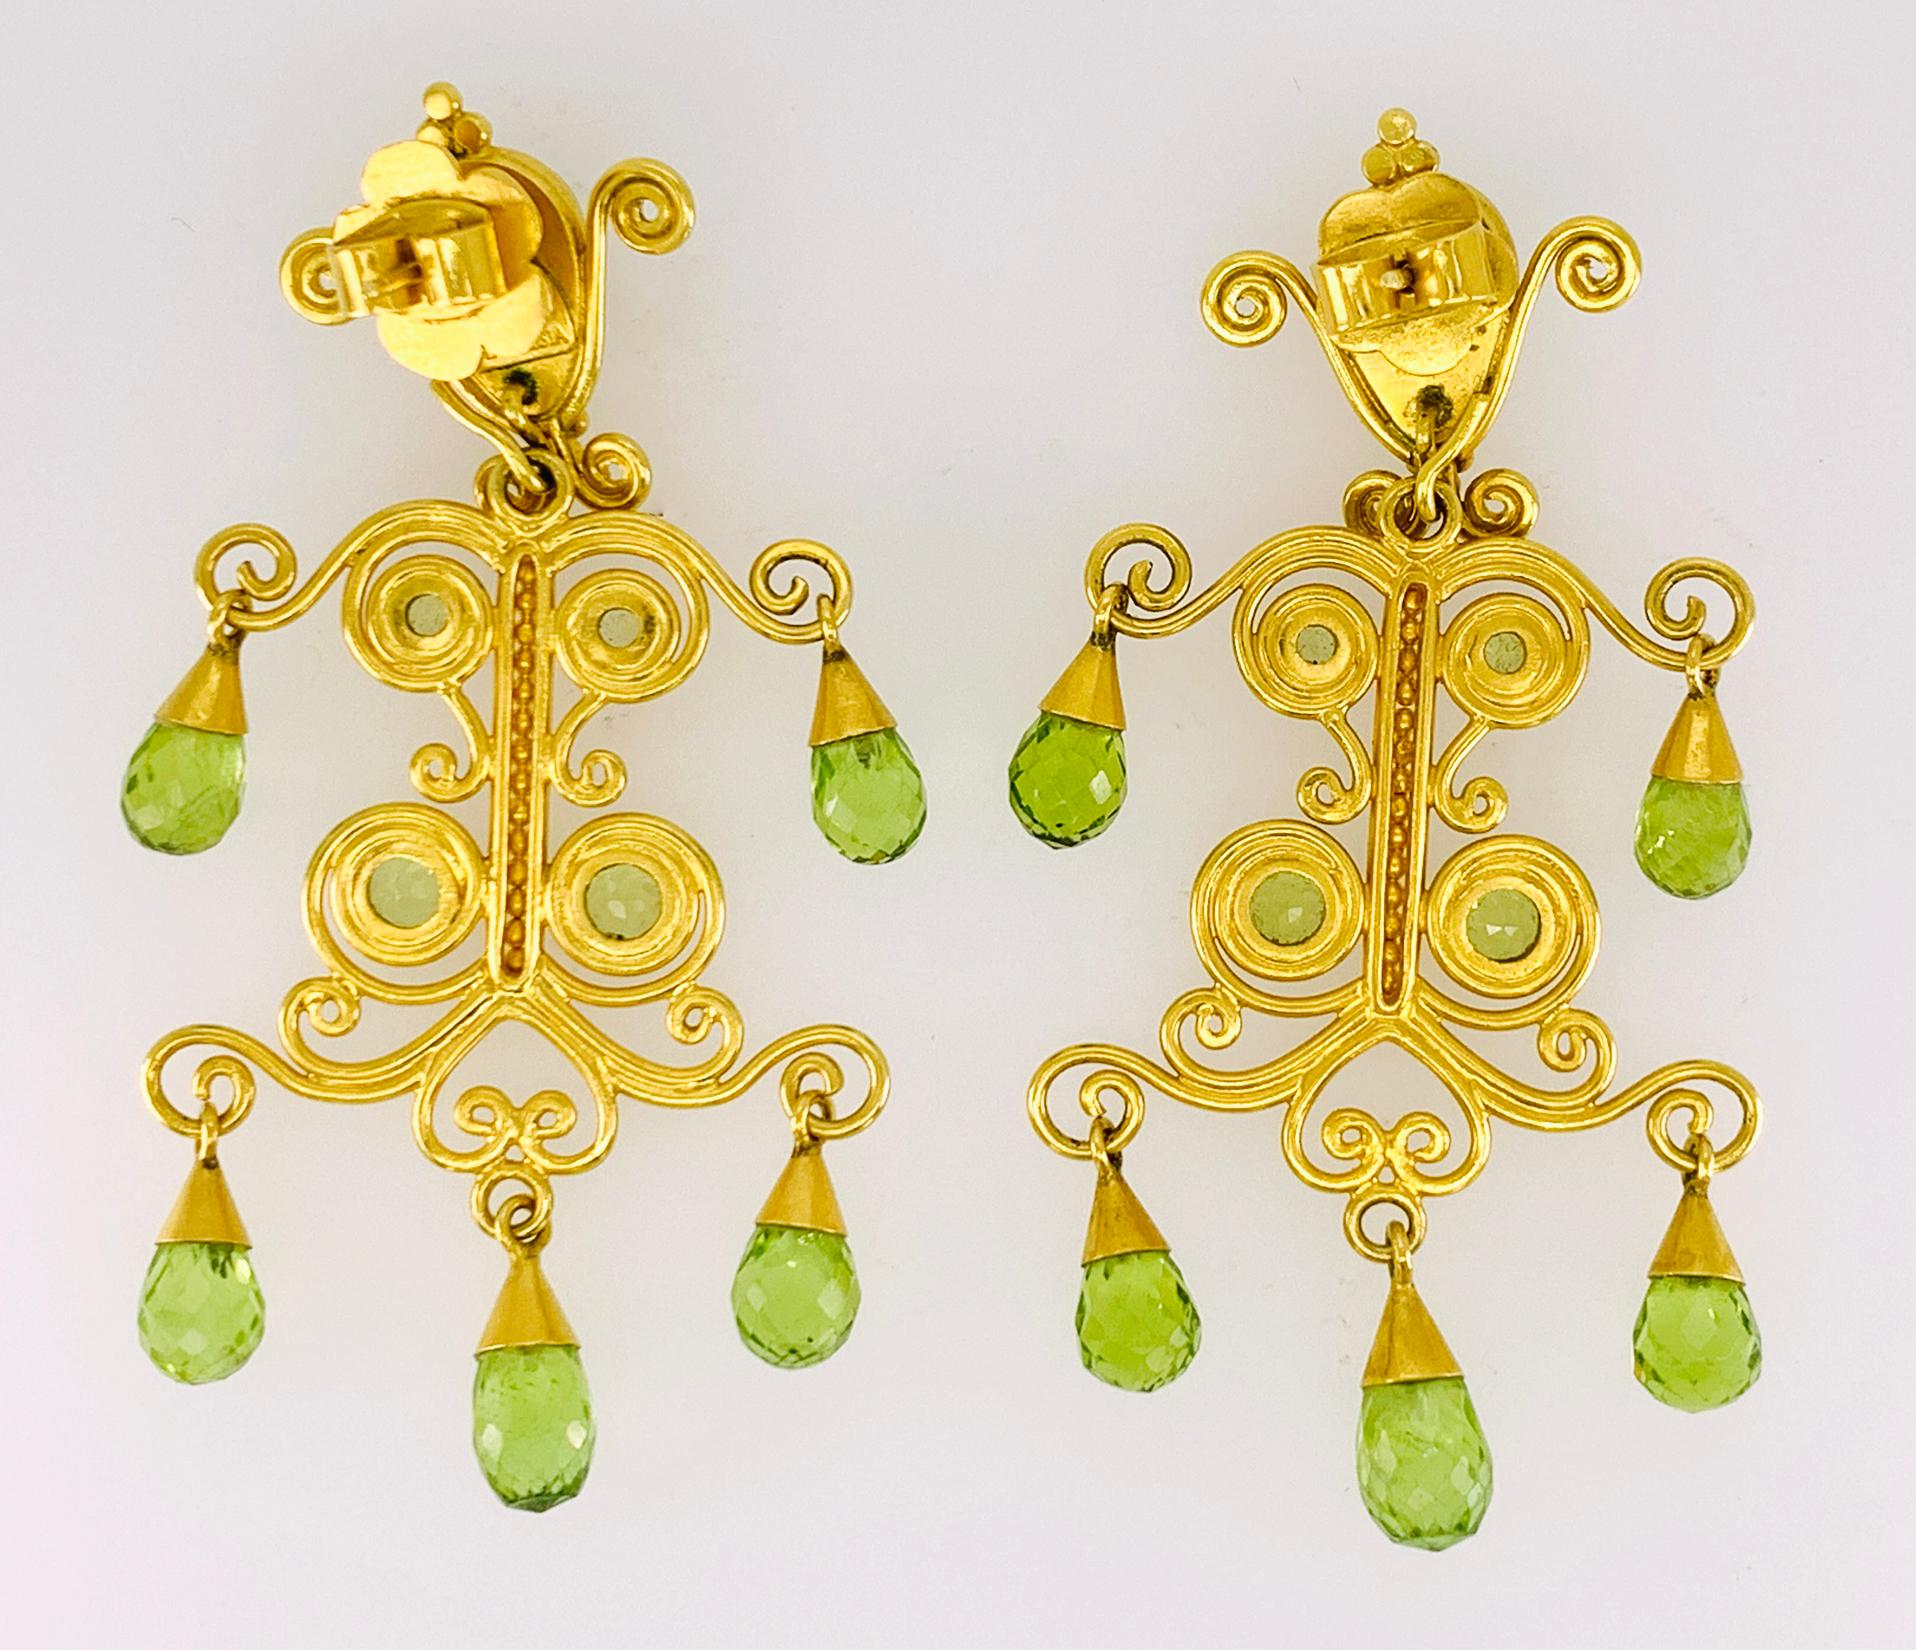 Peridot 'Sonya' Earrings in 22k and 18k Yellow Gold; Designed by Carolyn Tyler.  Featuring 20.08 carats of faceted Briolette, Pear Shape and Round cut Peridots with hand formed gold details.  The chandelier portion of the earring may also be removed